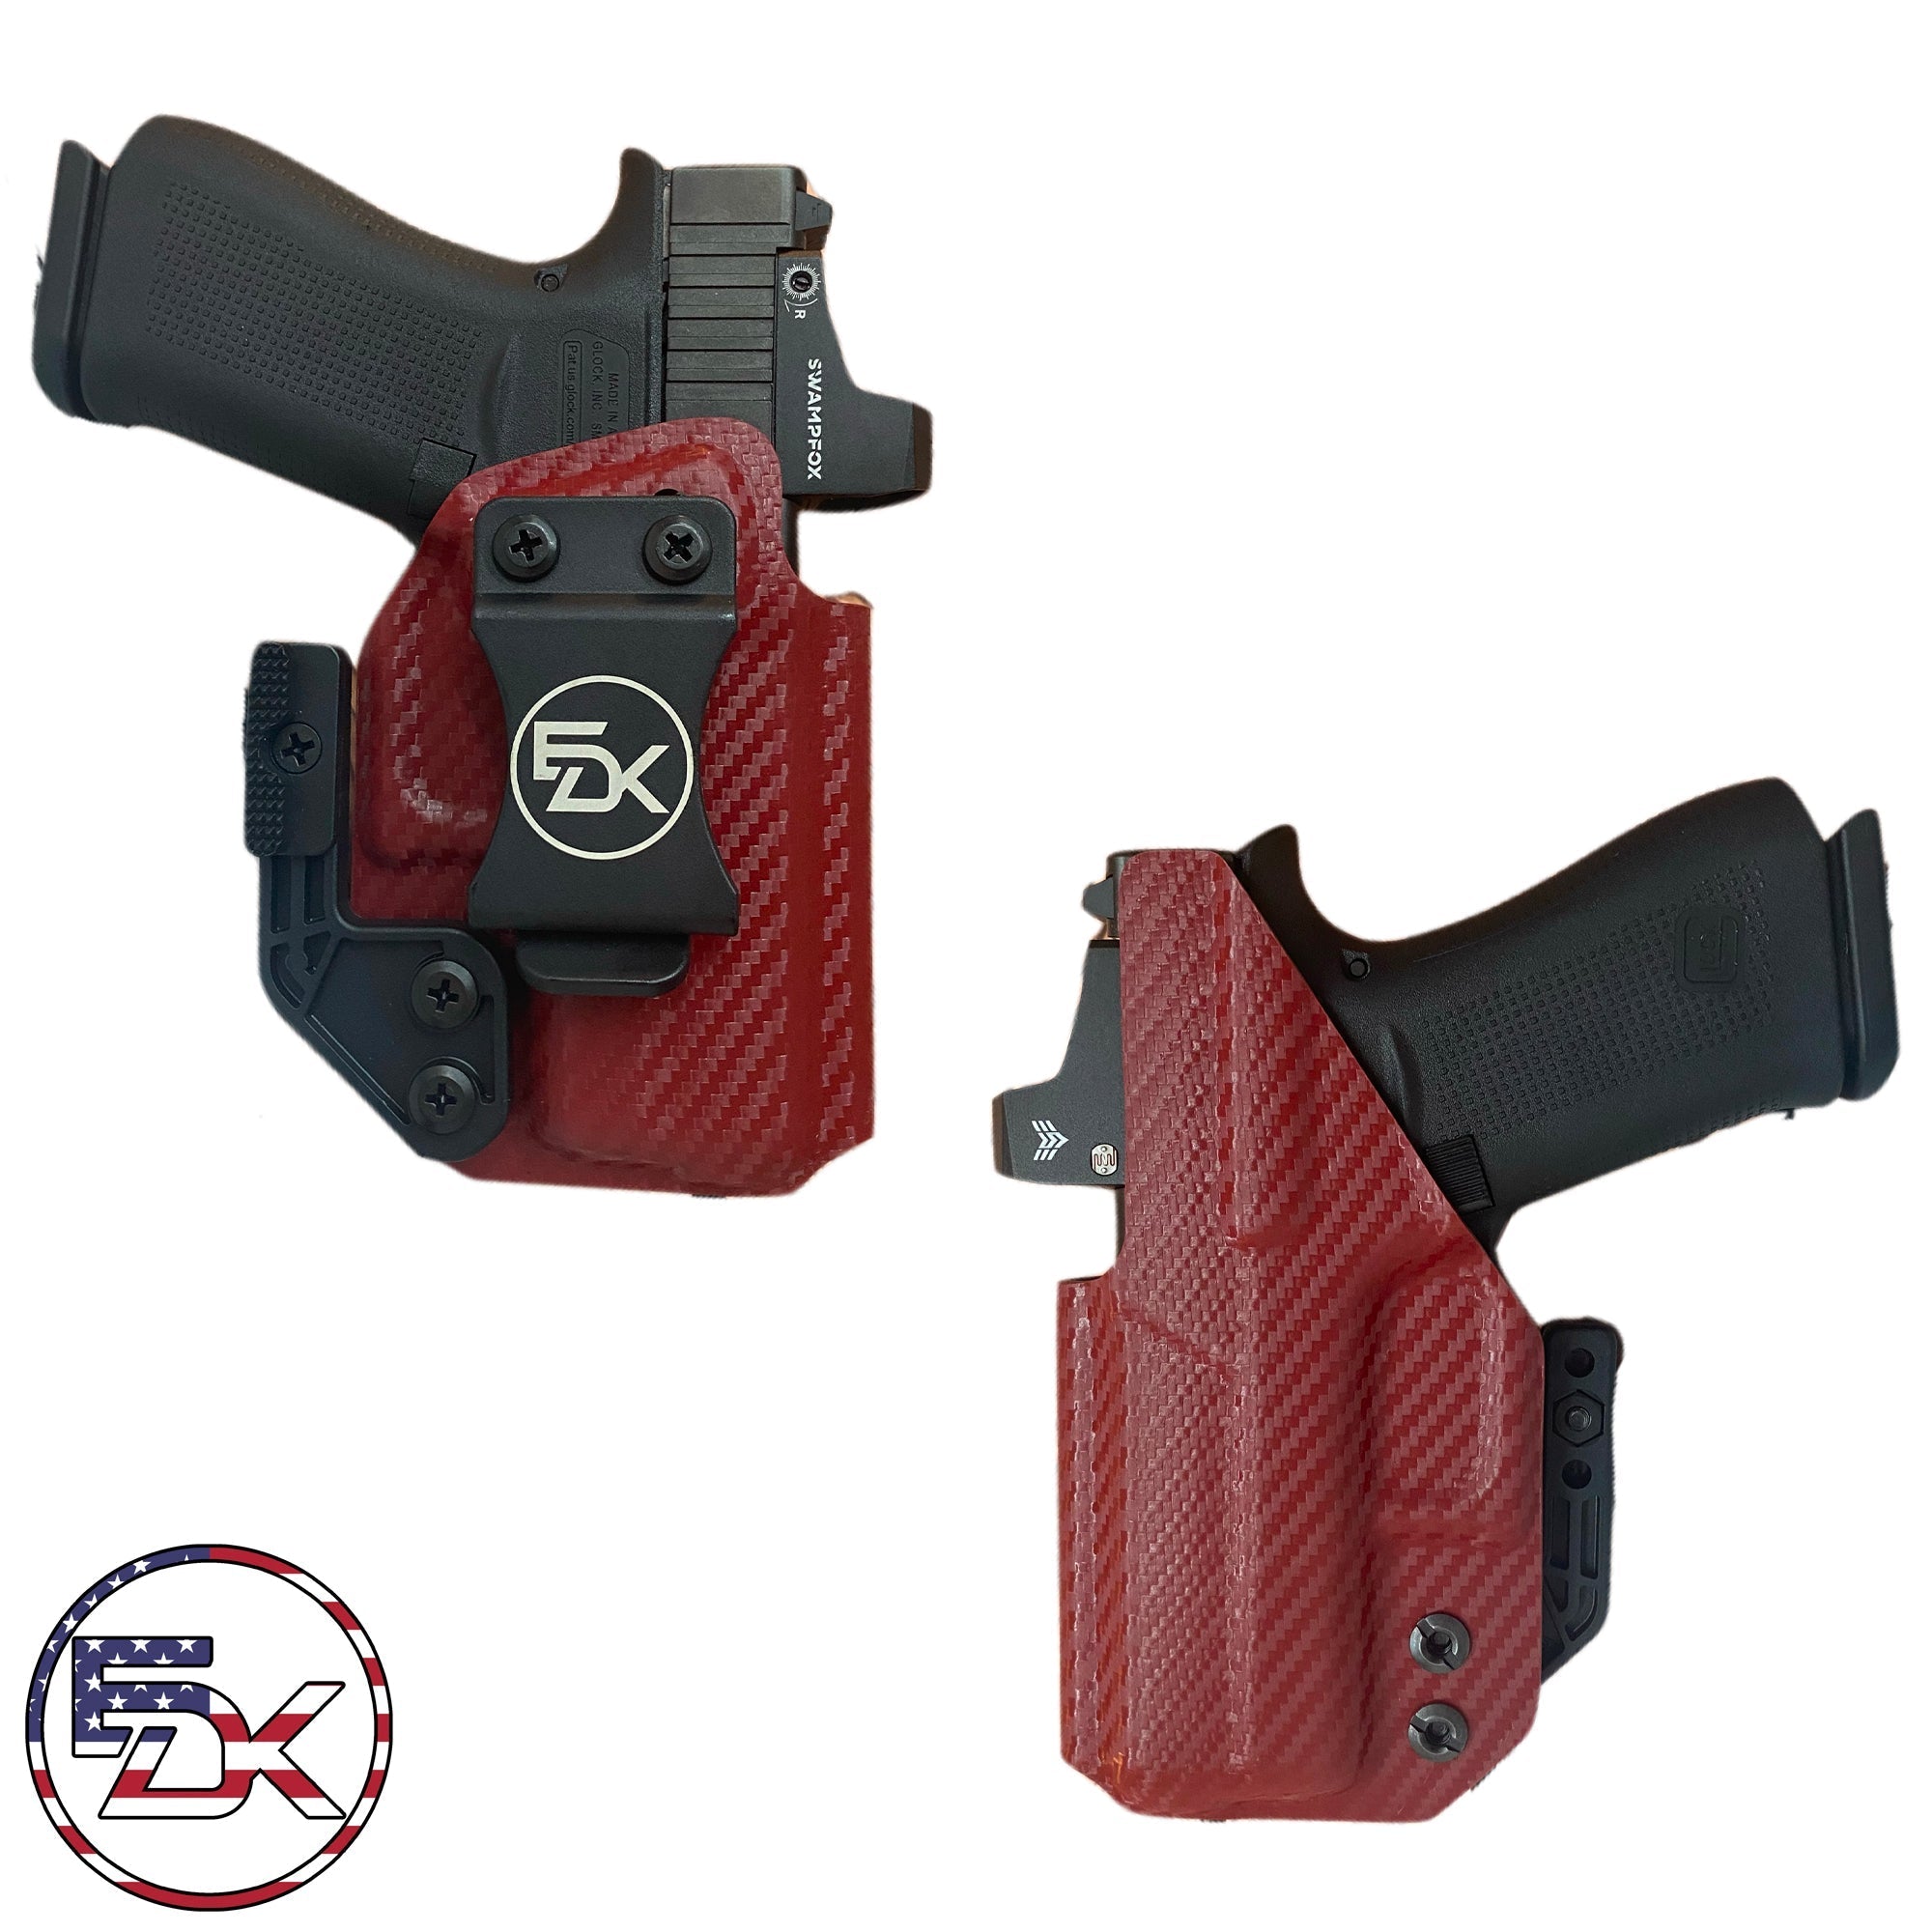  Ruger LCP 2 Holster IWB Kydex for Ruger LCP II Pistol